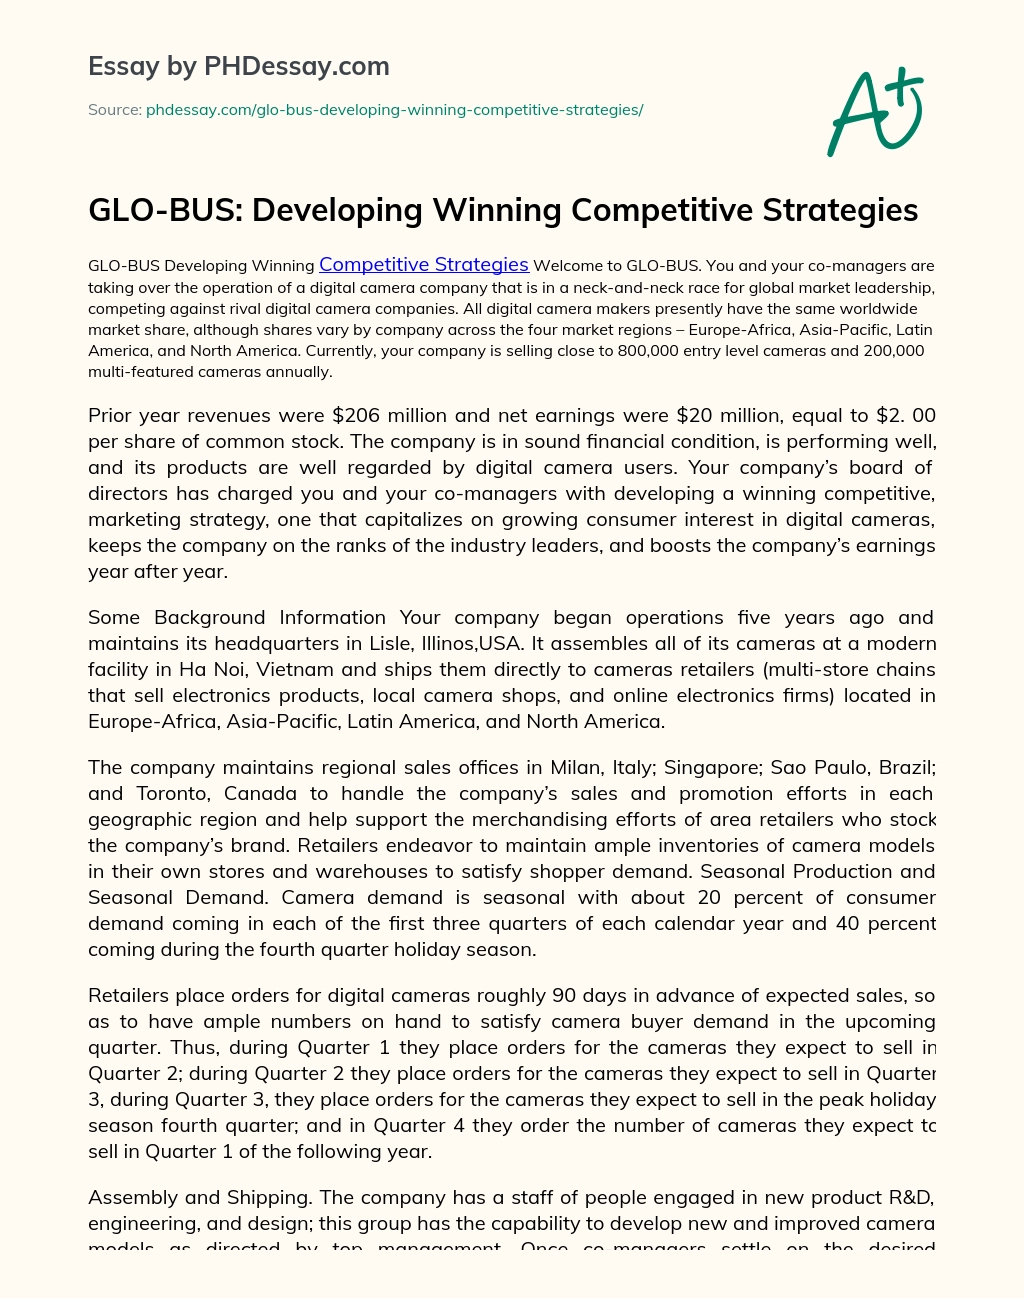 GLO-BUS: Developing Winning Competitive Strategies essay